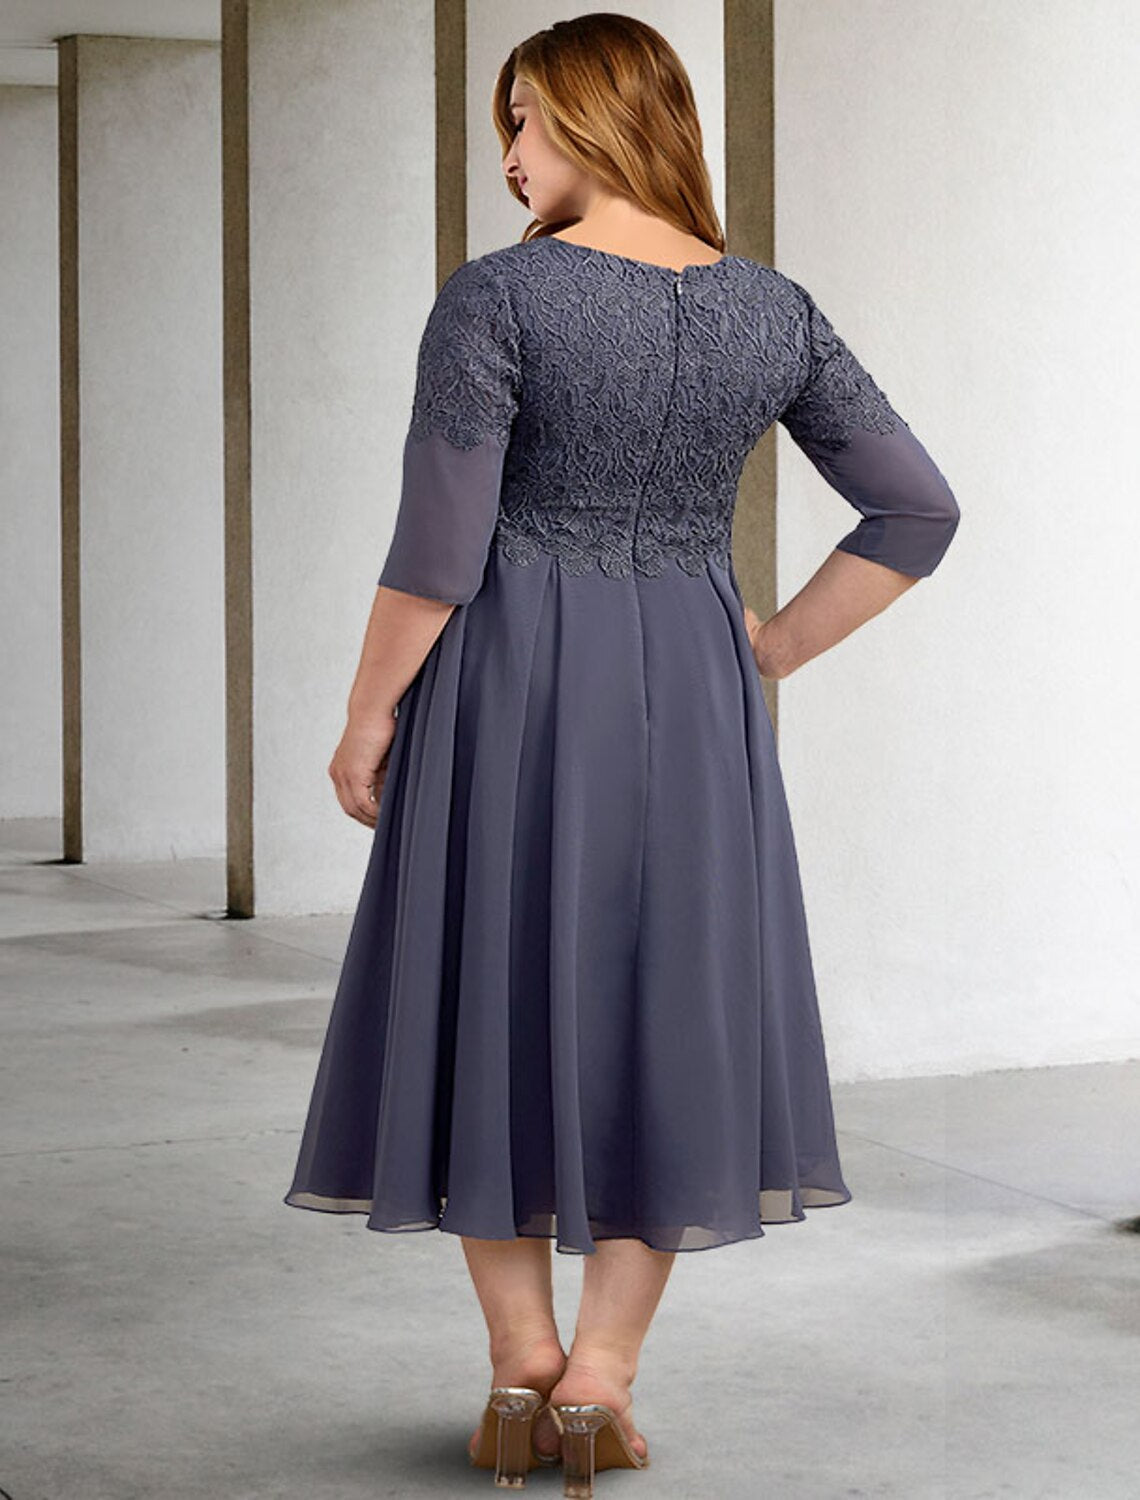 A-Line Mother of the Bride Dresses Plus Size Hide Belly Curve Elegant Dress Formal Tea Length Half Sleeve V Neck Chiffon with Buttons Appliques Fall